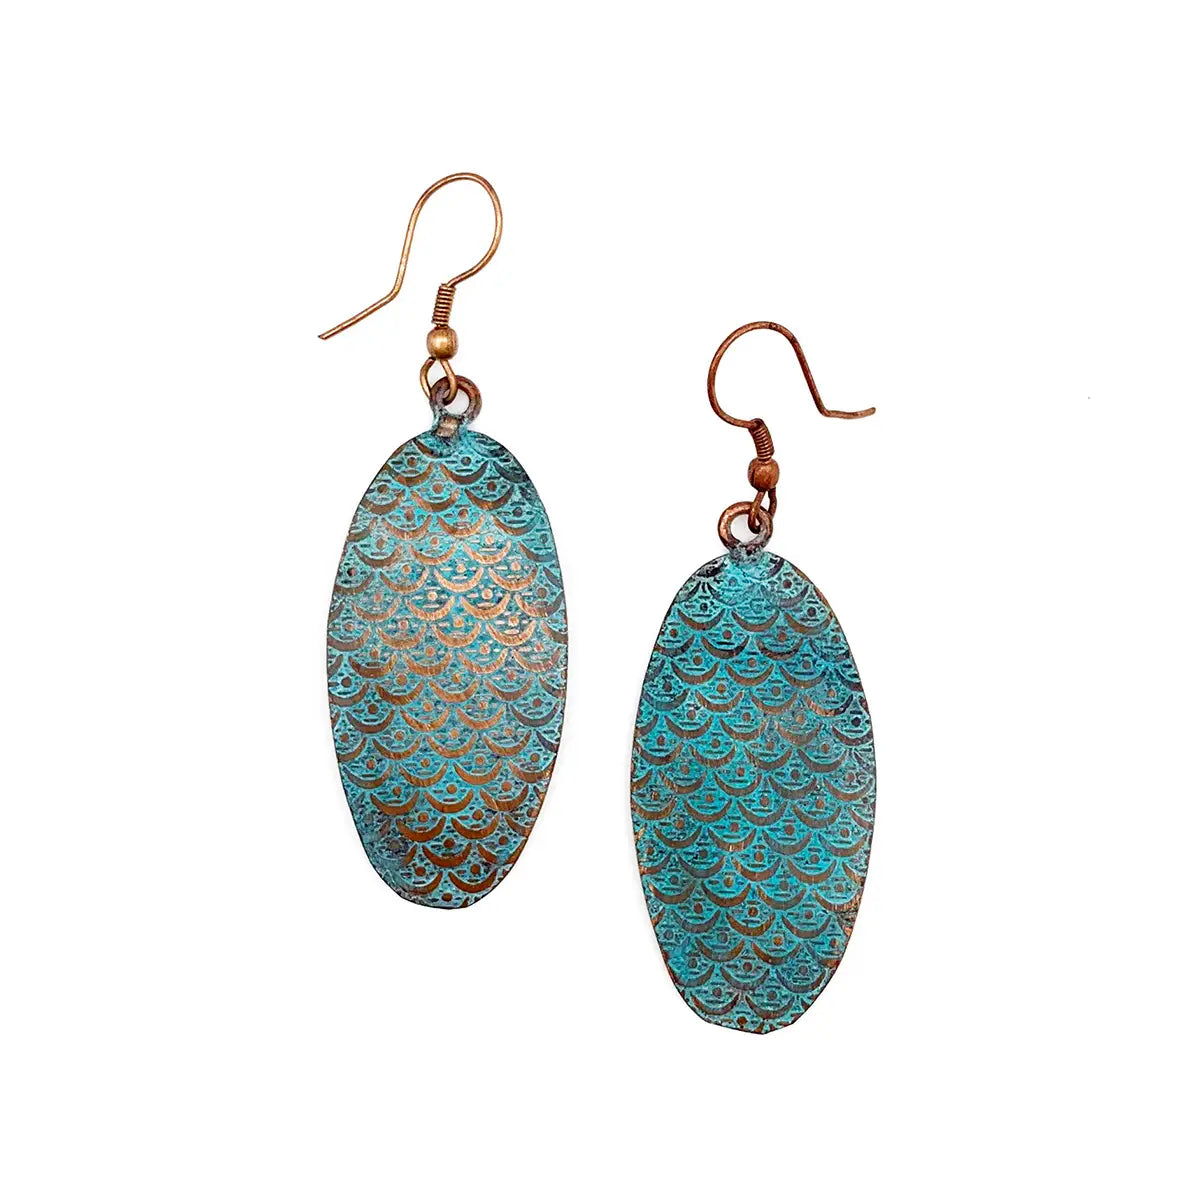 Copper Patina Earrings - Turquoise Scallop Ovals